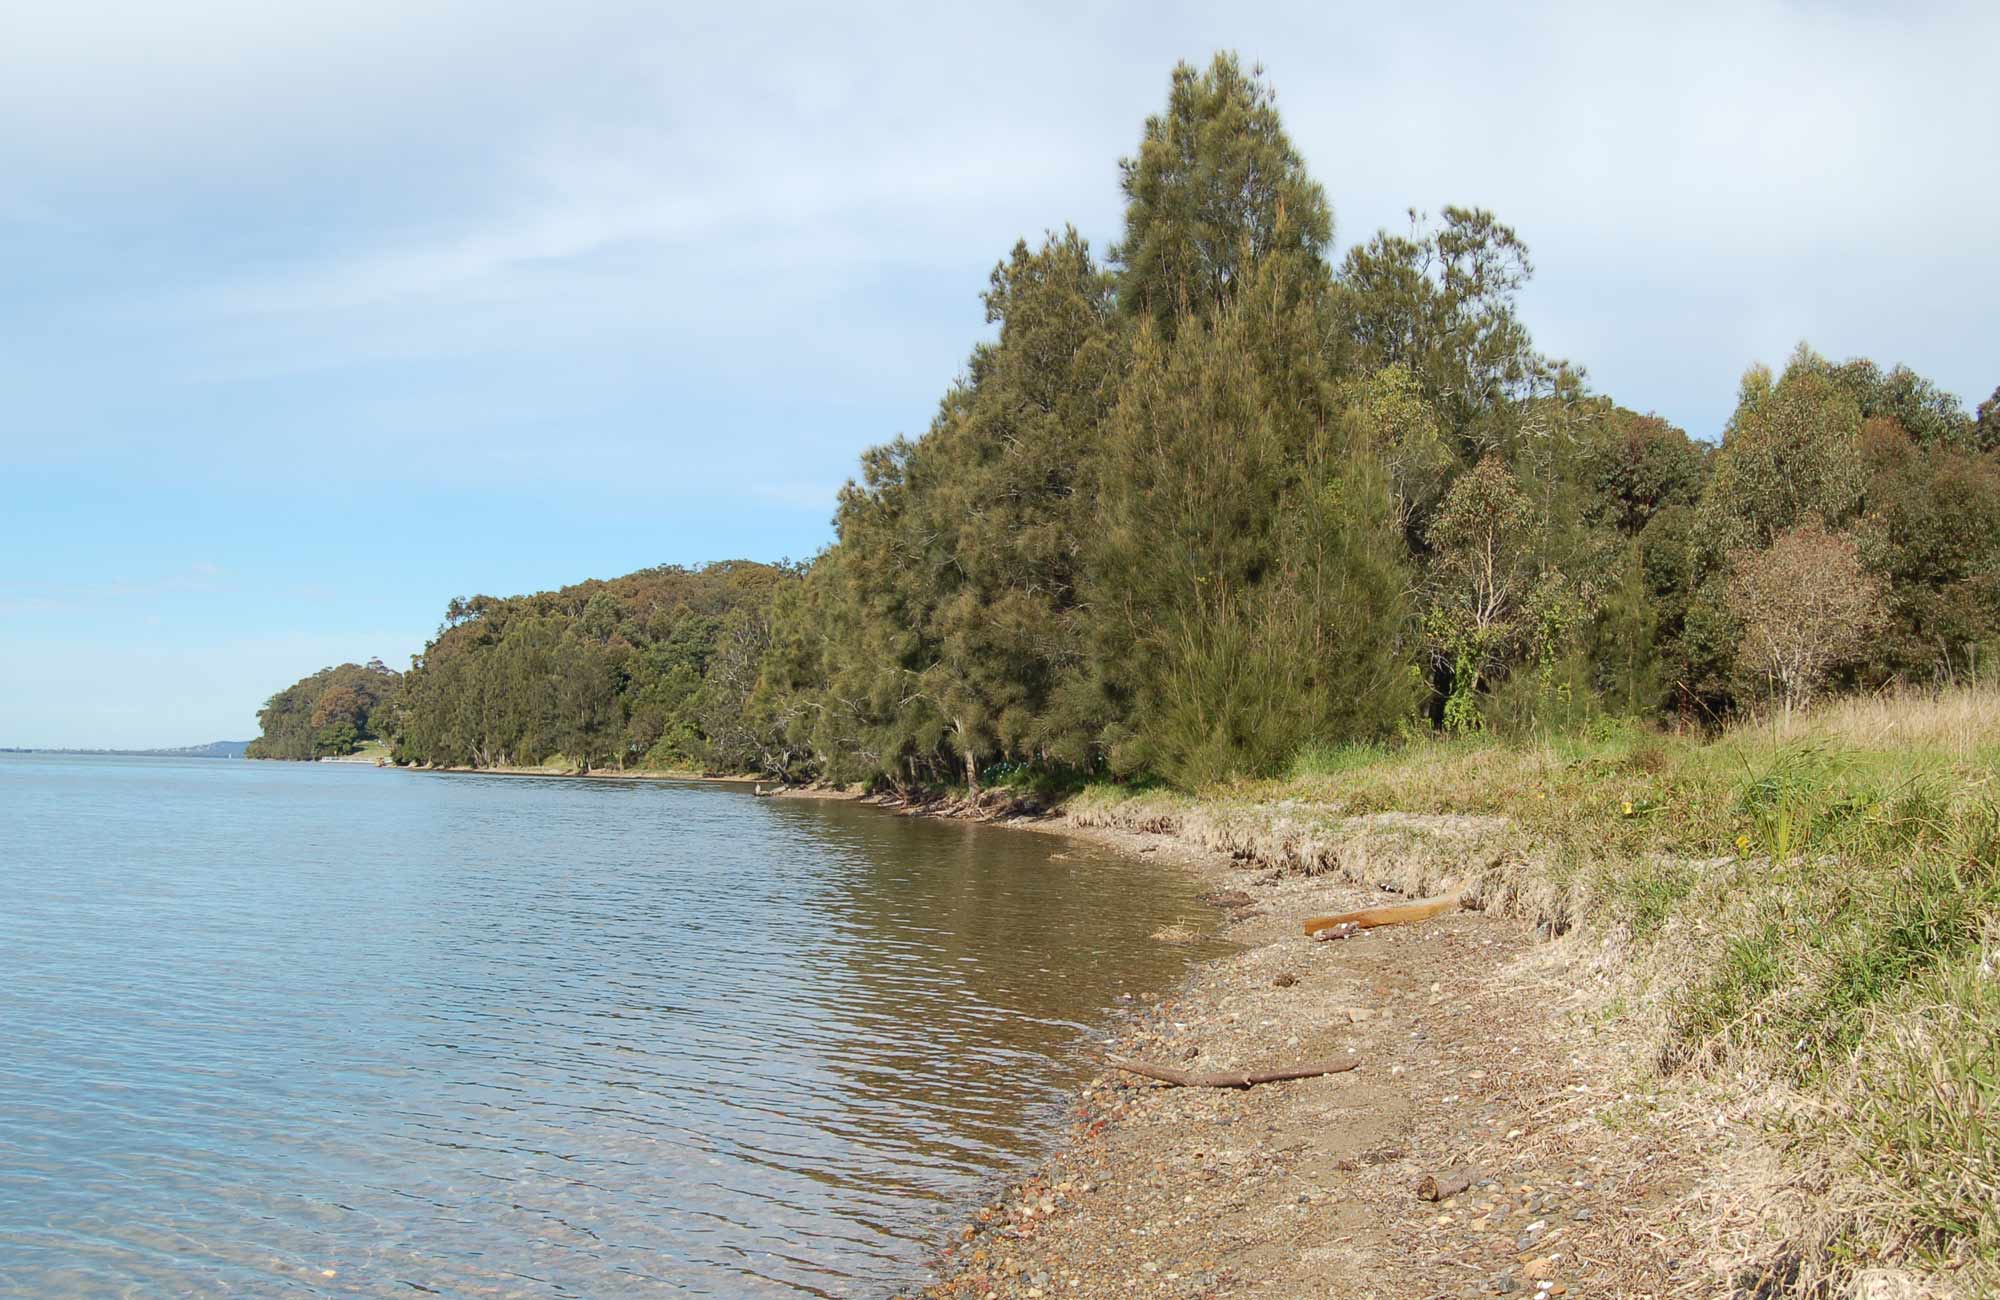 Alexanders picnic area, Lake Macquarie State Conservation Area. Photo: Susan Davis/NSW Government